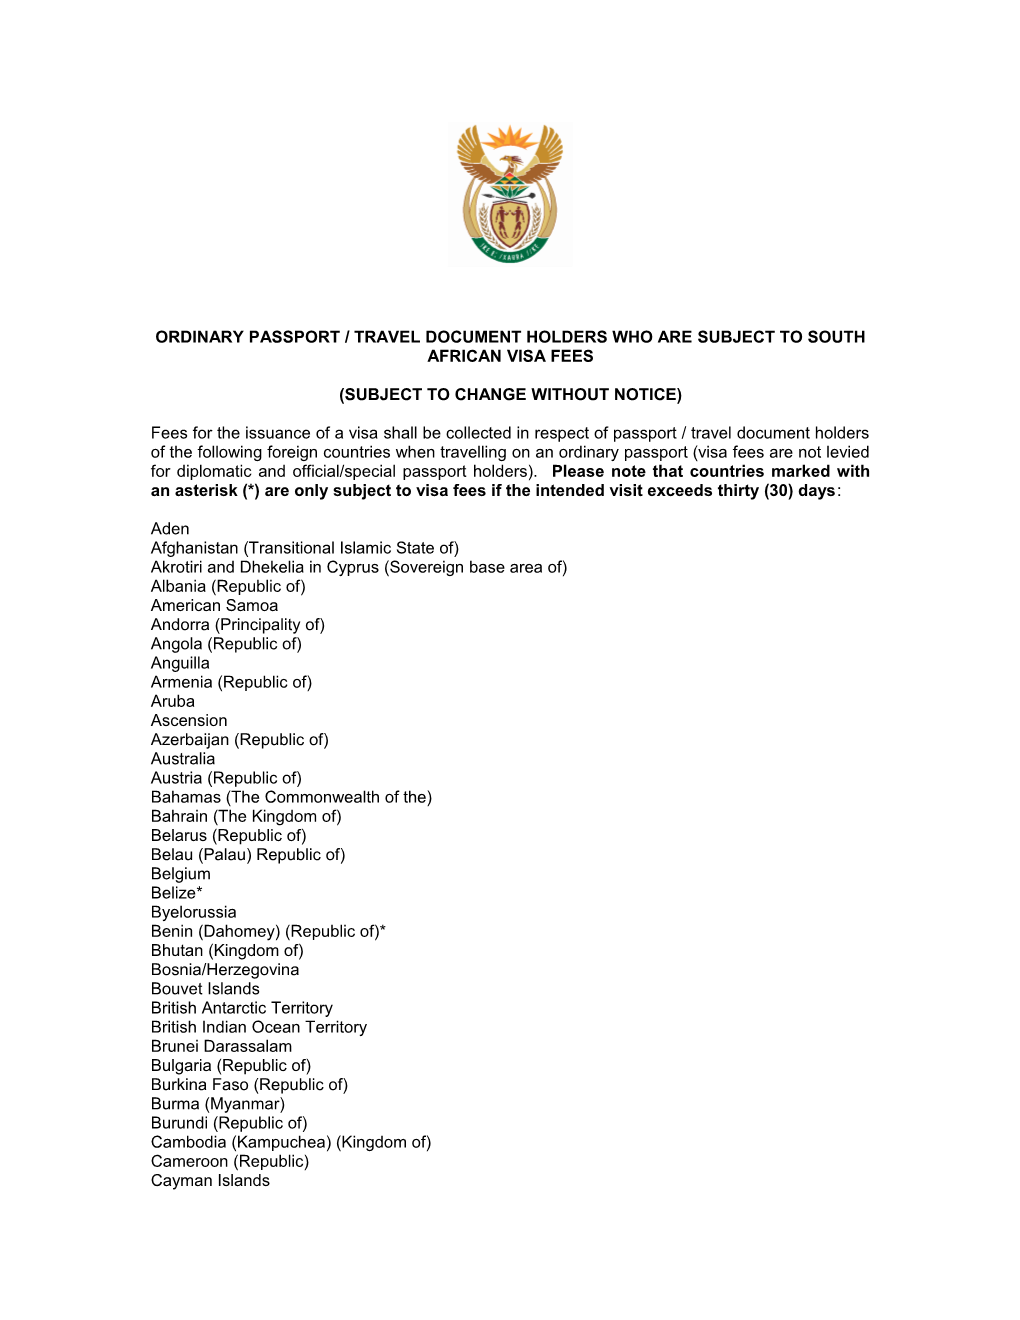 Ordinary Passport / Travel Document Holders Who Are Subject to South African Visa Fees